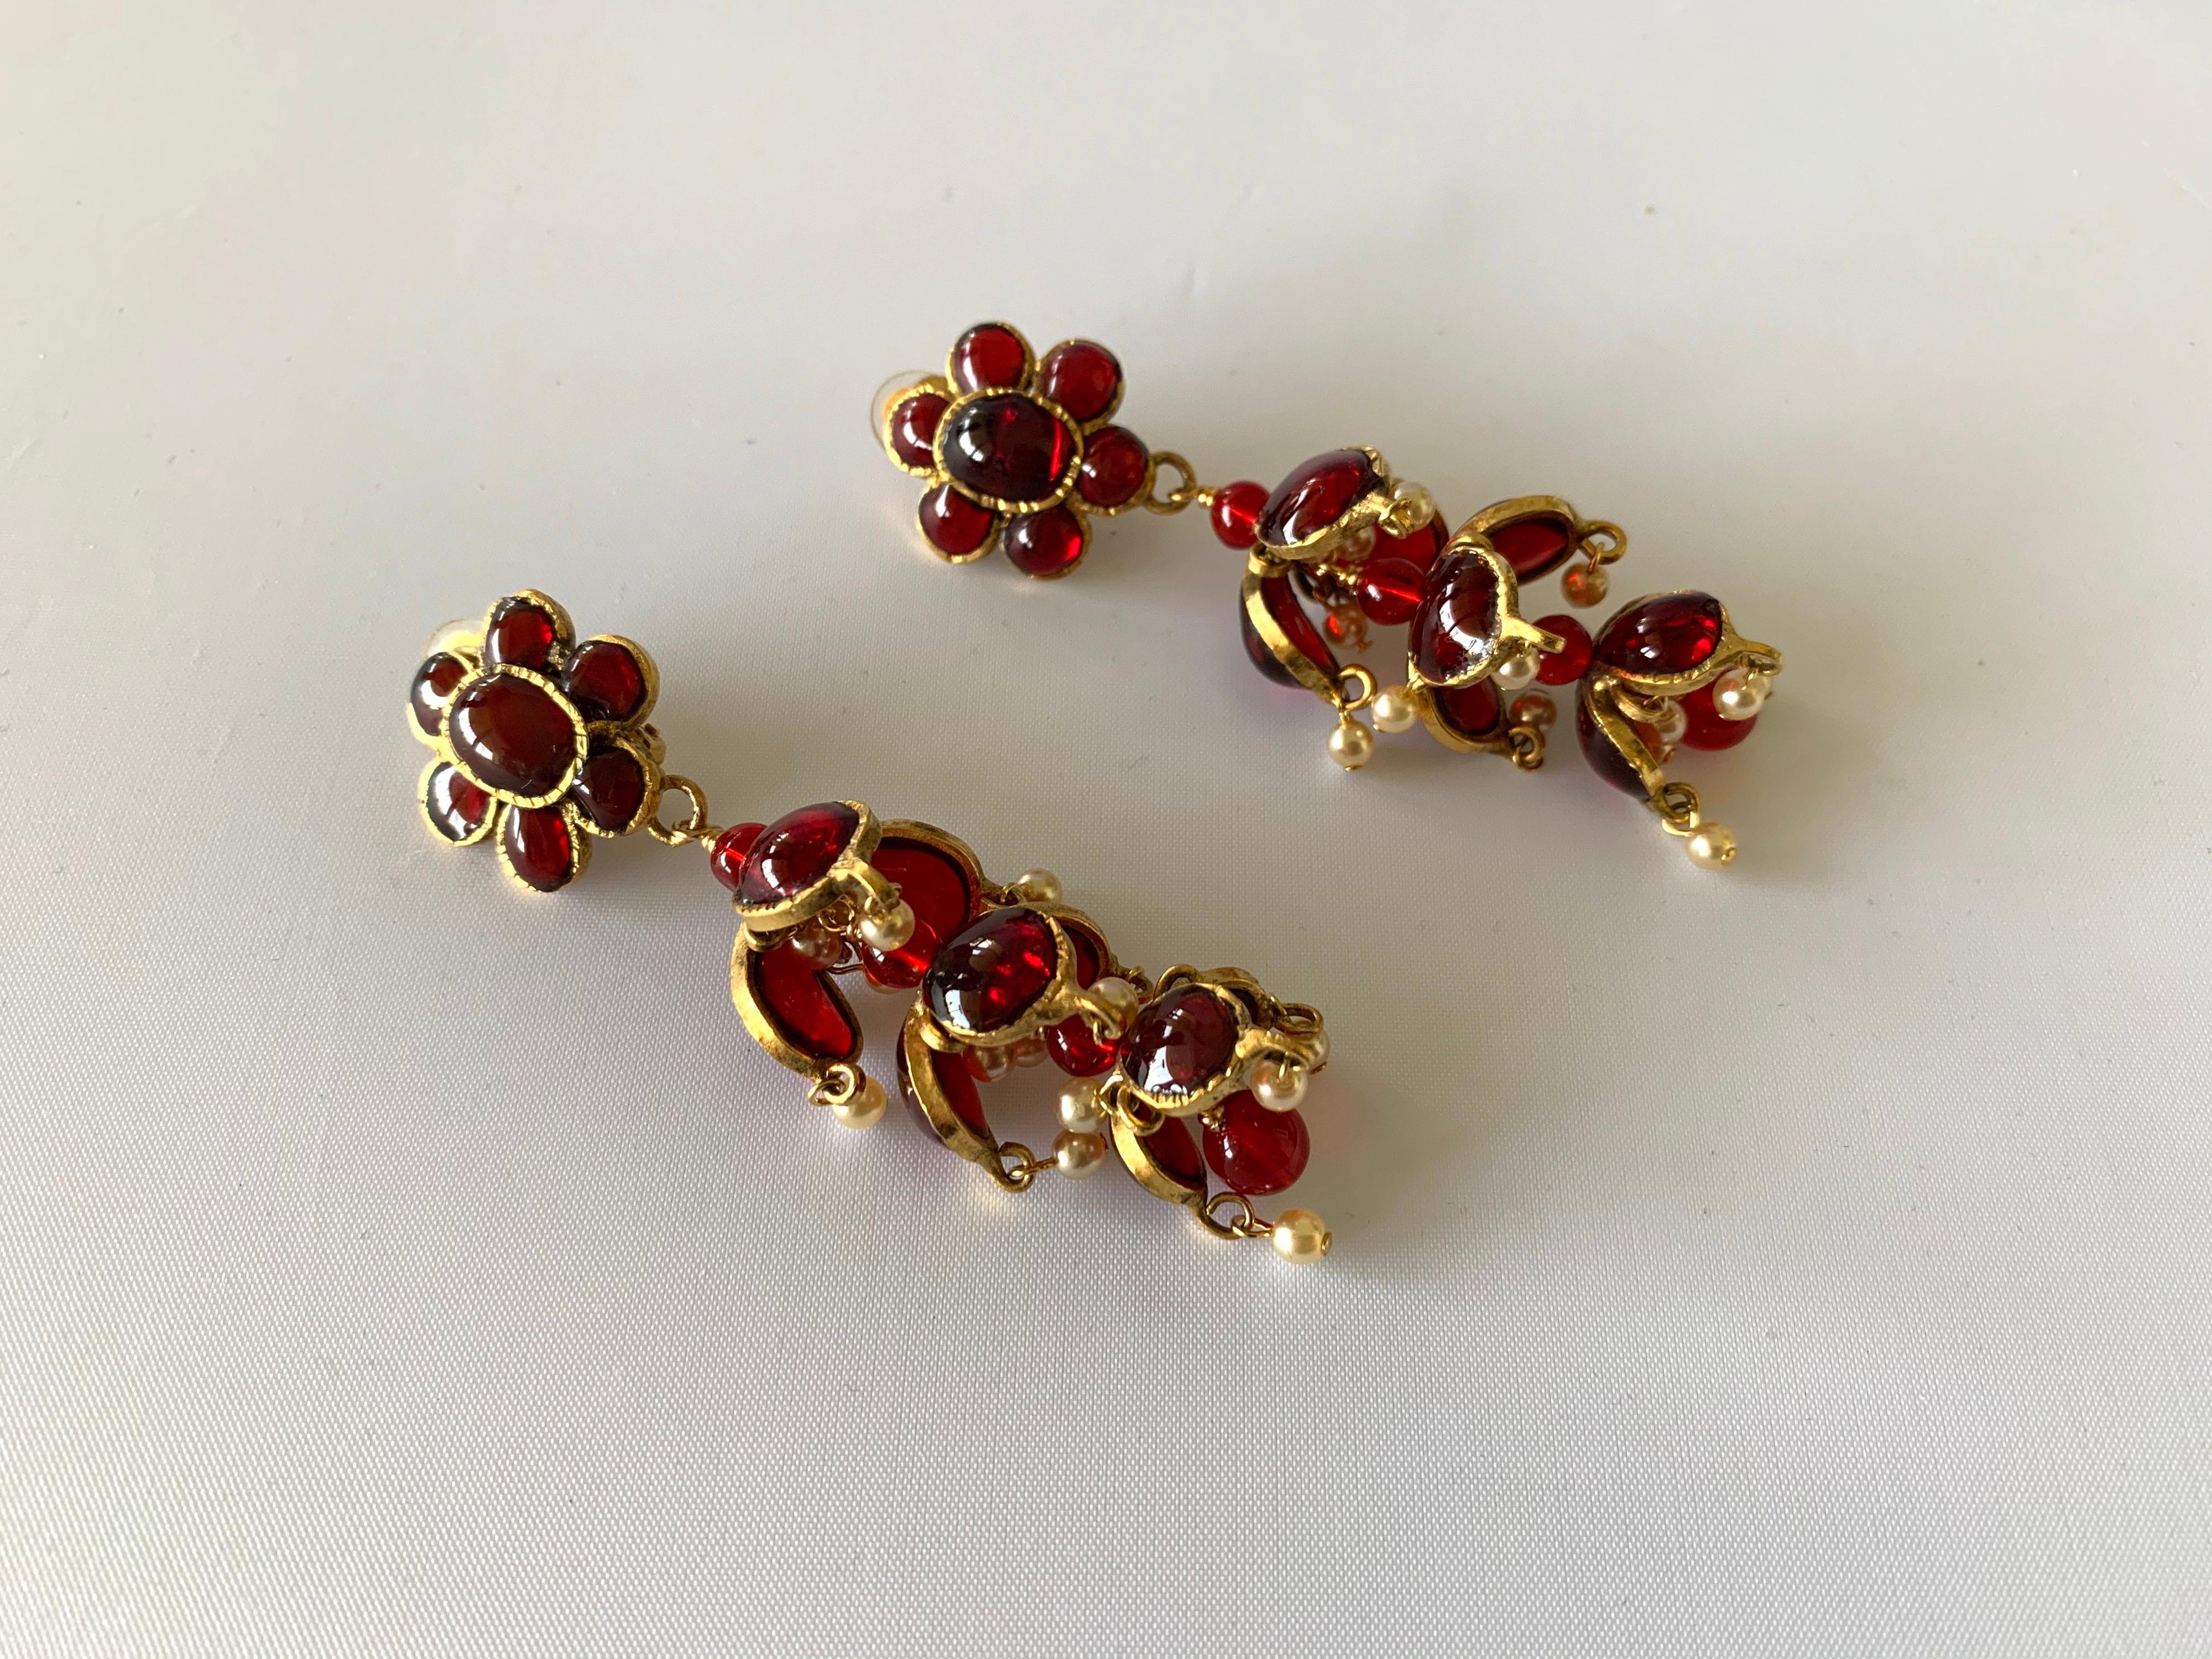 Vintage Chanel Ruby and Pearl Mughal Statement Earrings 1